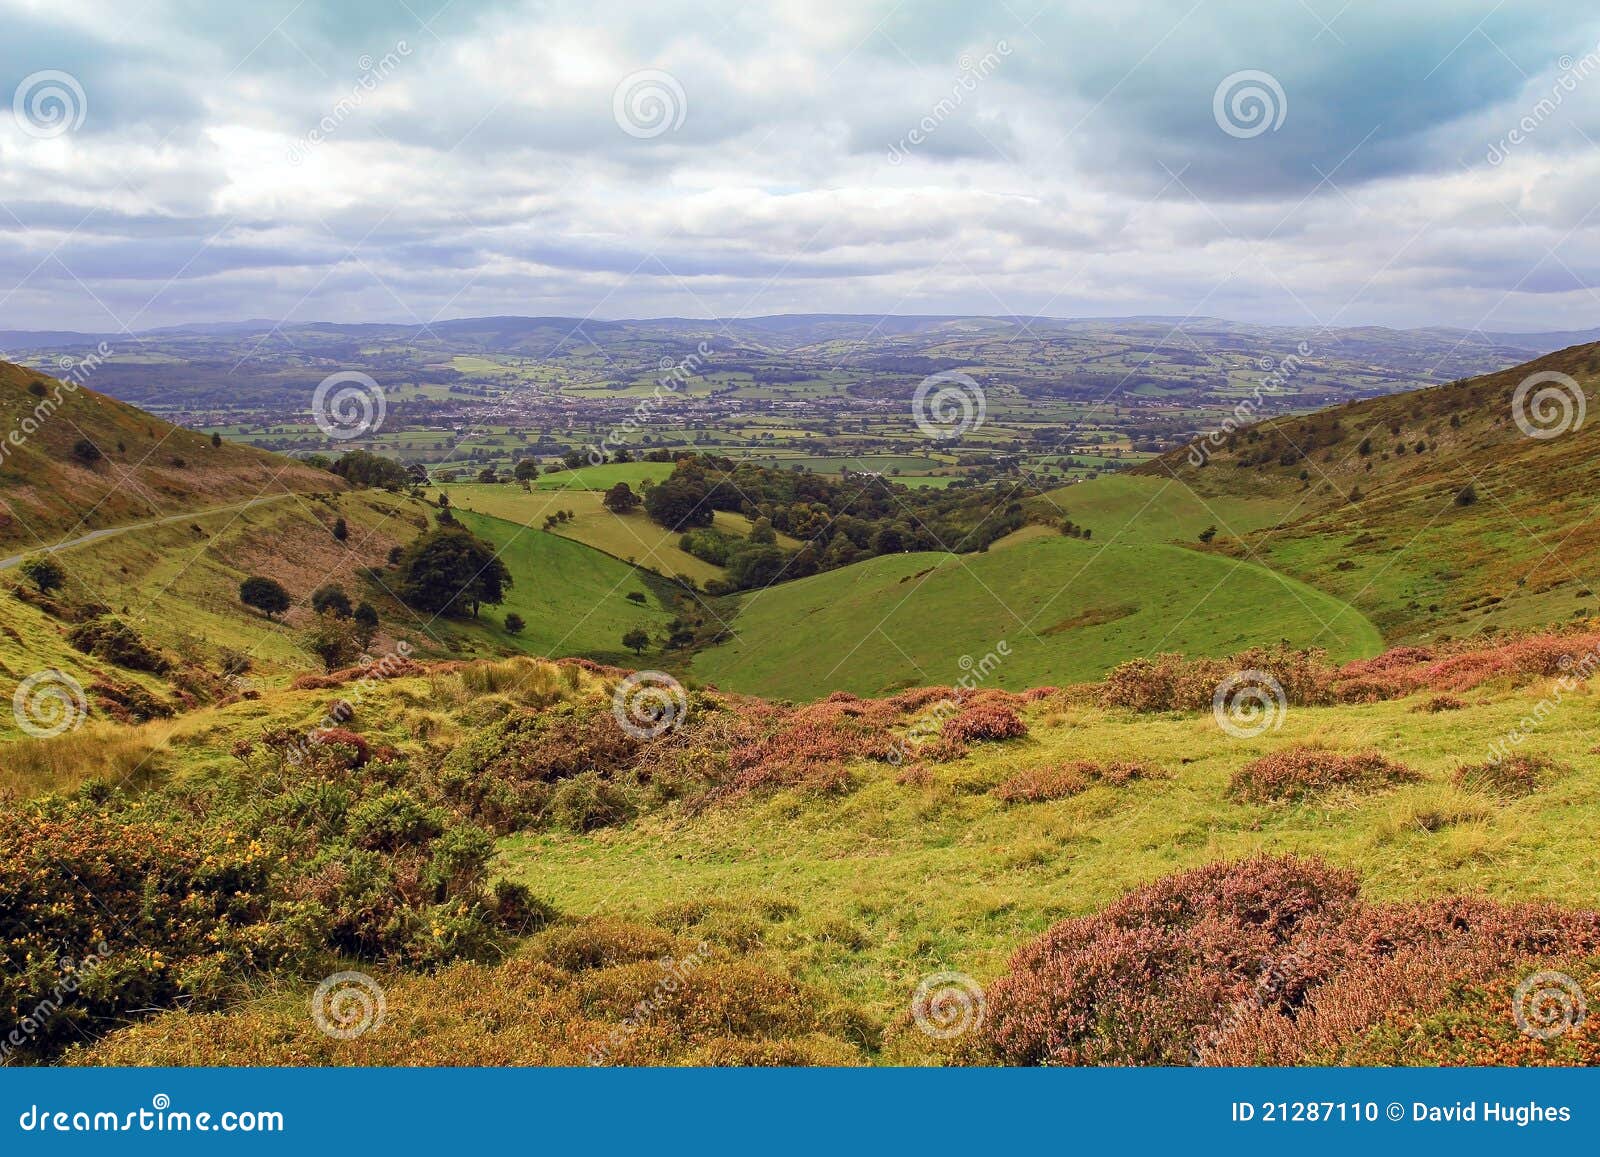 the vale of clwyd, wales 003